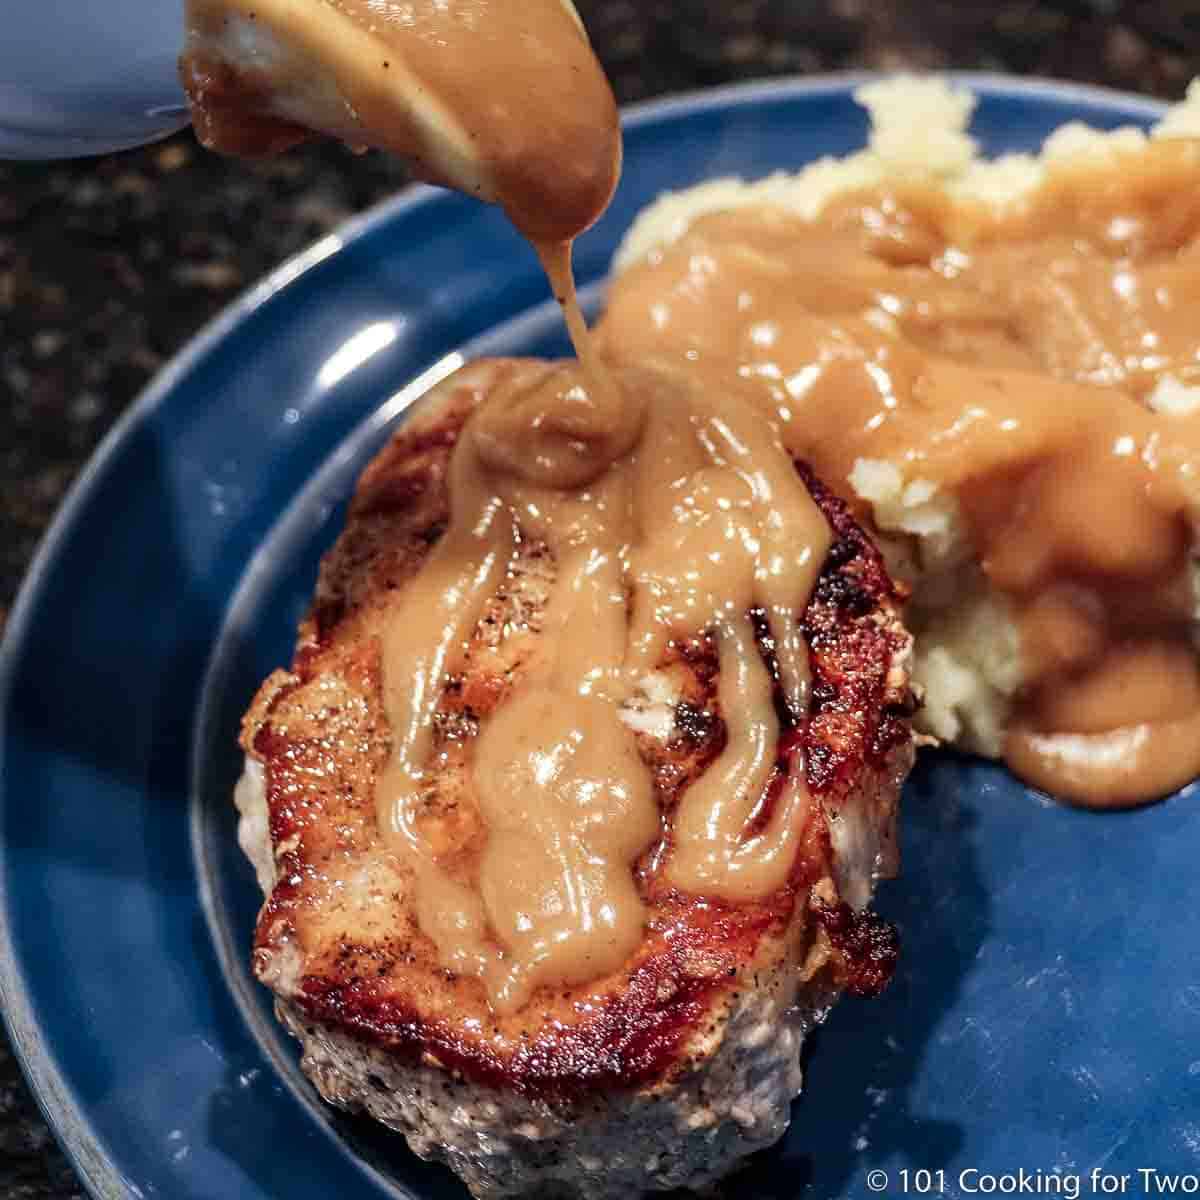 image of a thicker pork chops with gravy on a blue plate